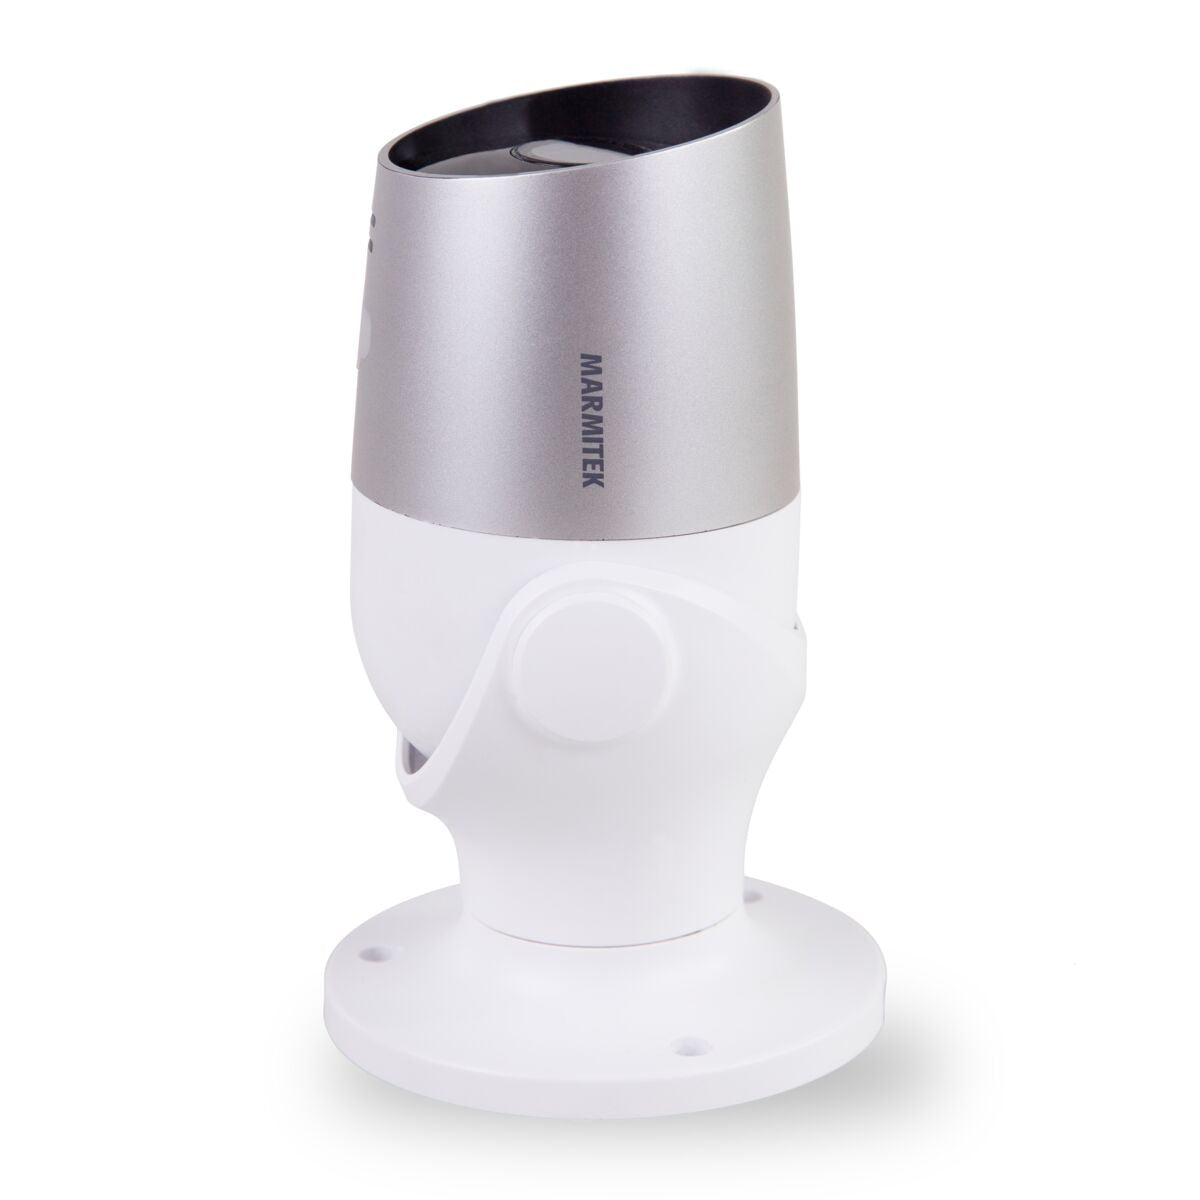 View MO - Wi-Fi camera outdoor - Front View Image with camera pointing up | Marmitek